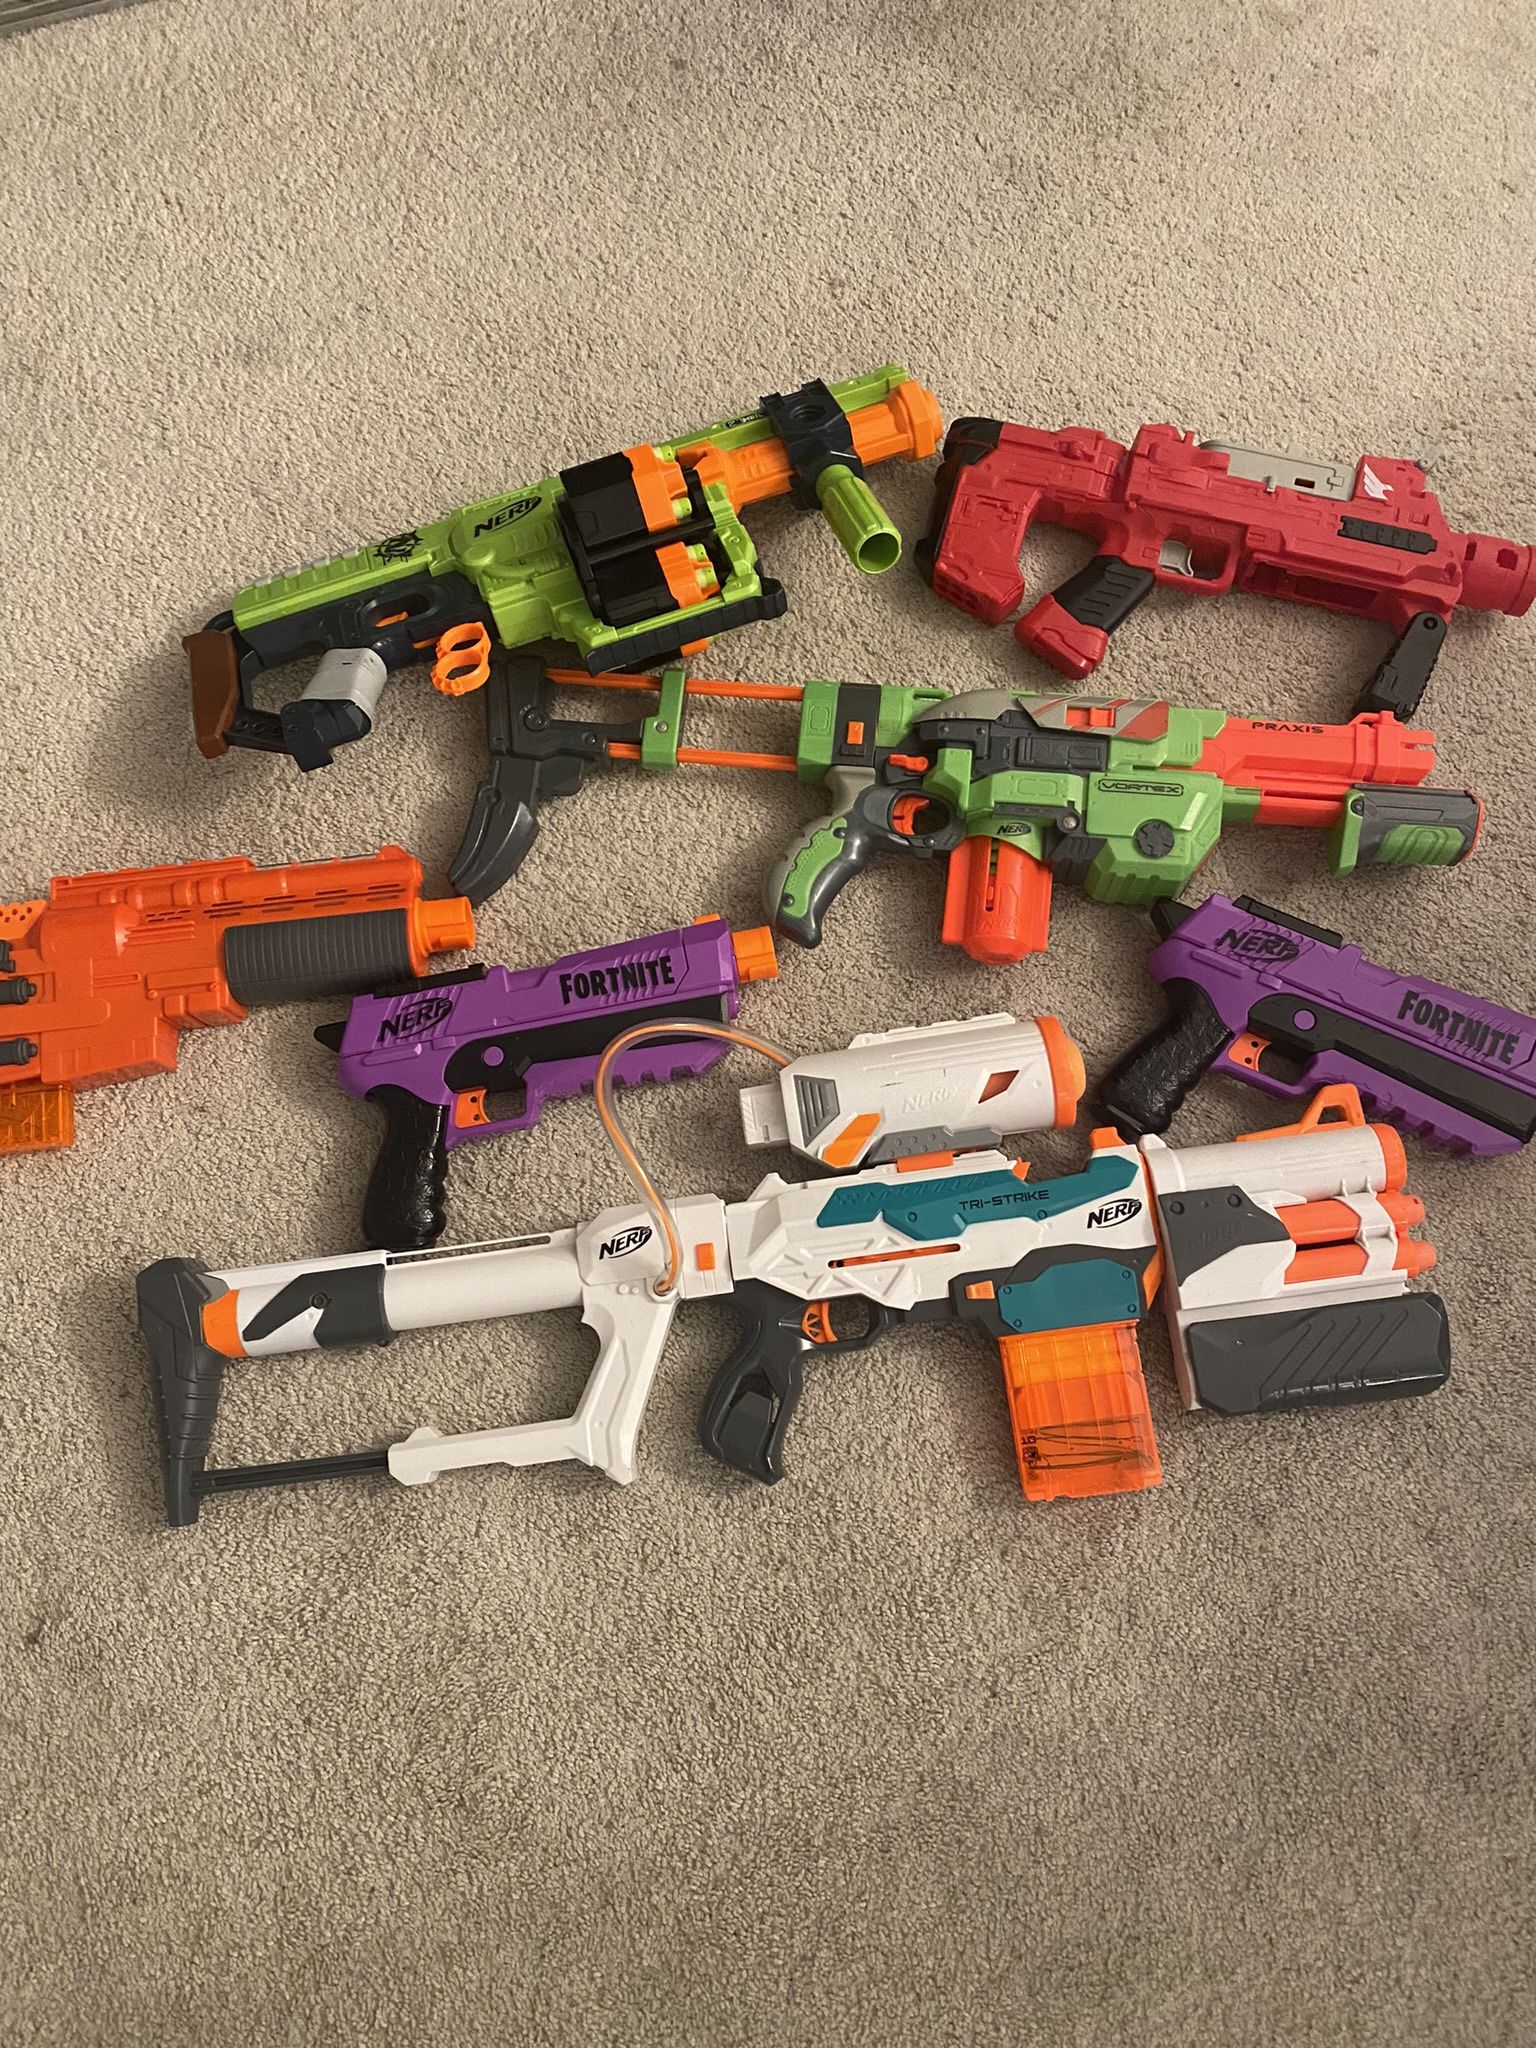 7 Nerf Guns With Bullets